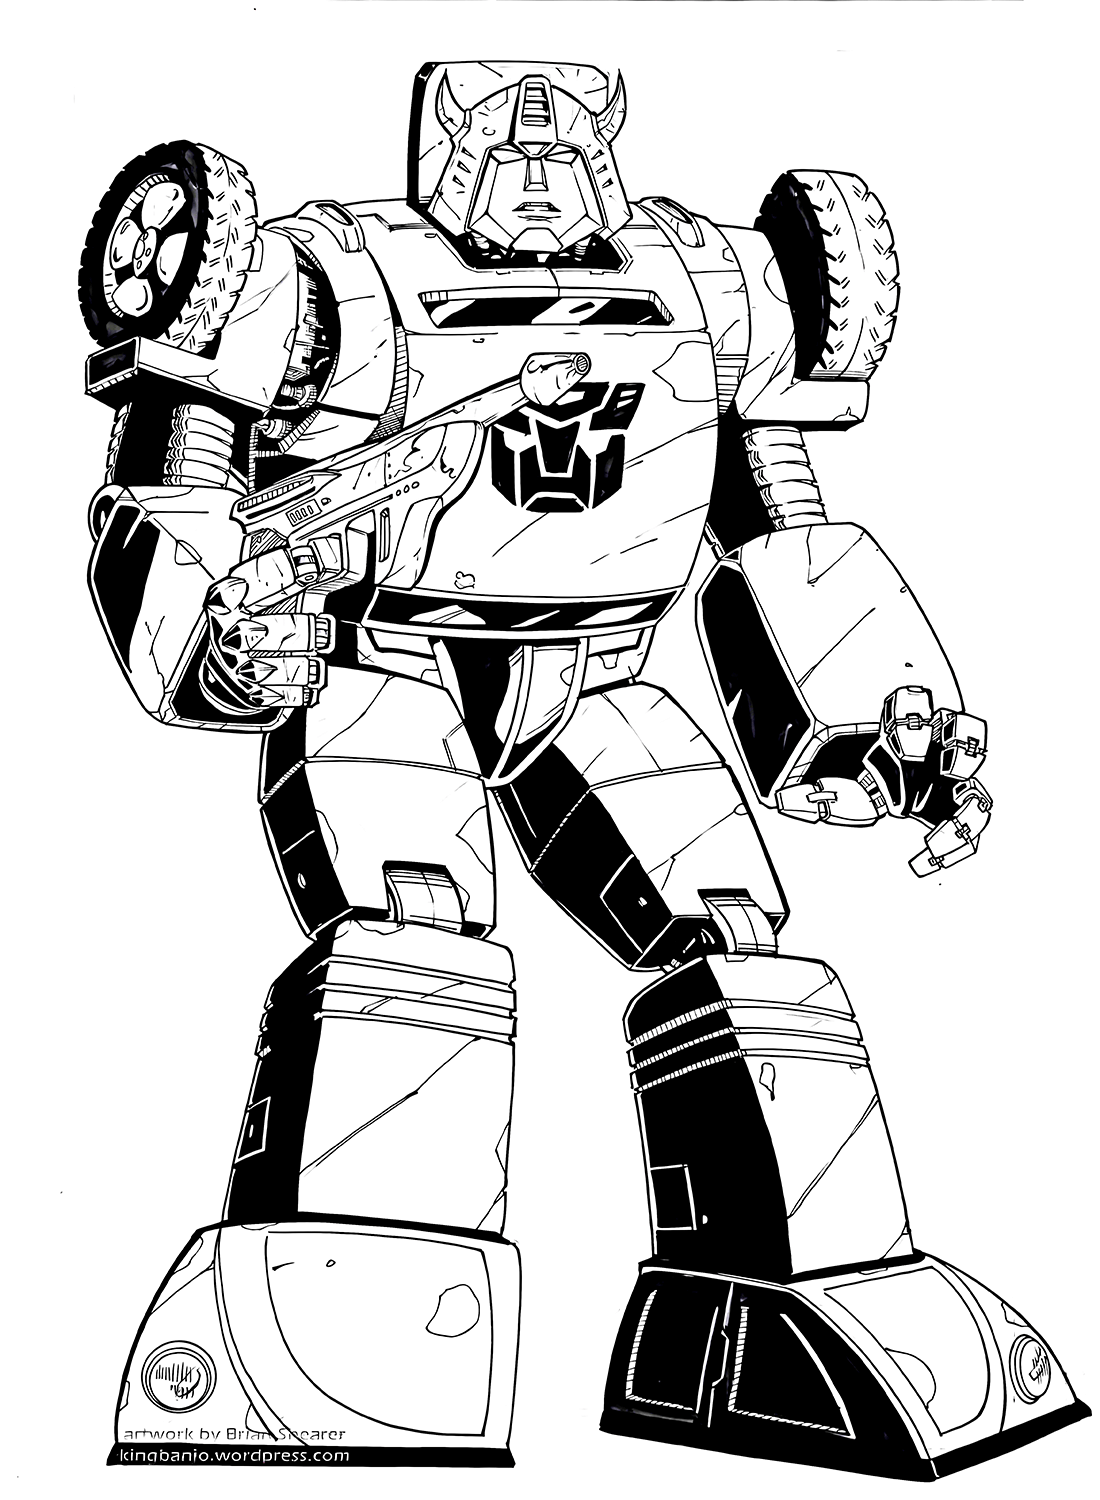 Bumblebee Image to Color